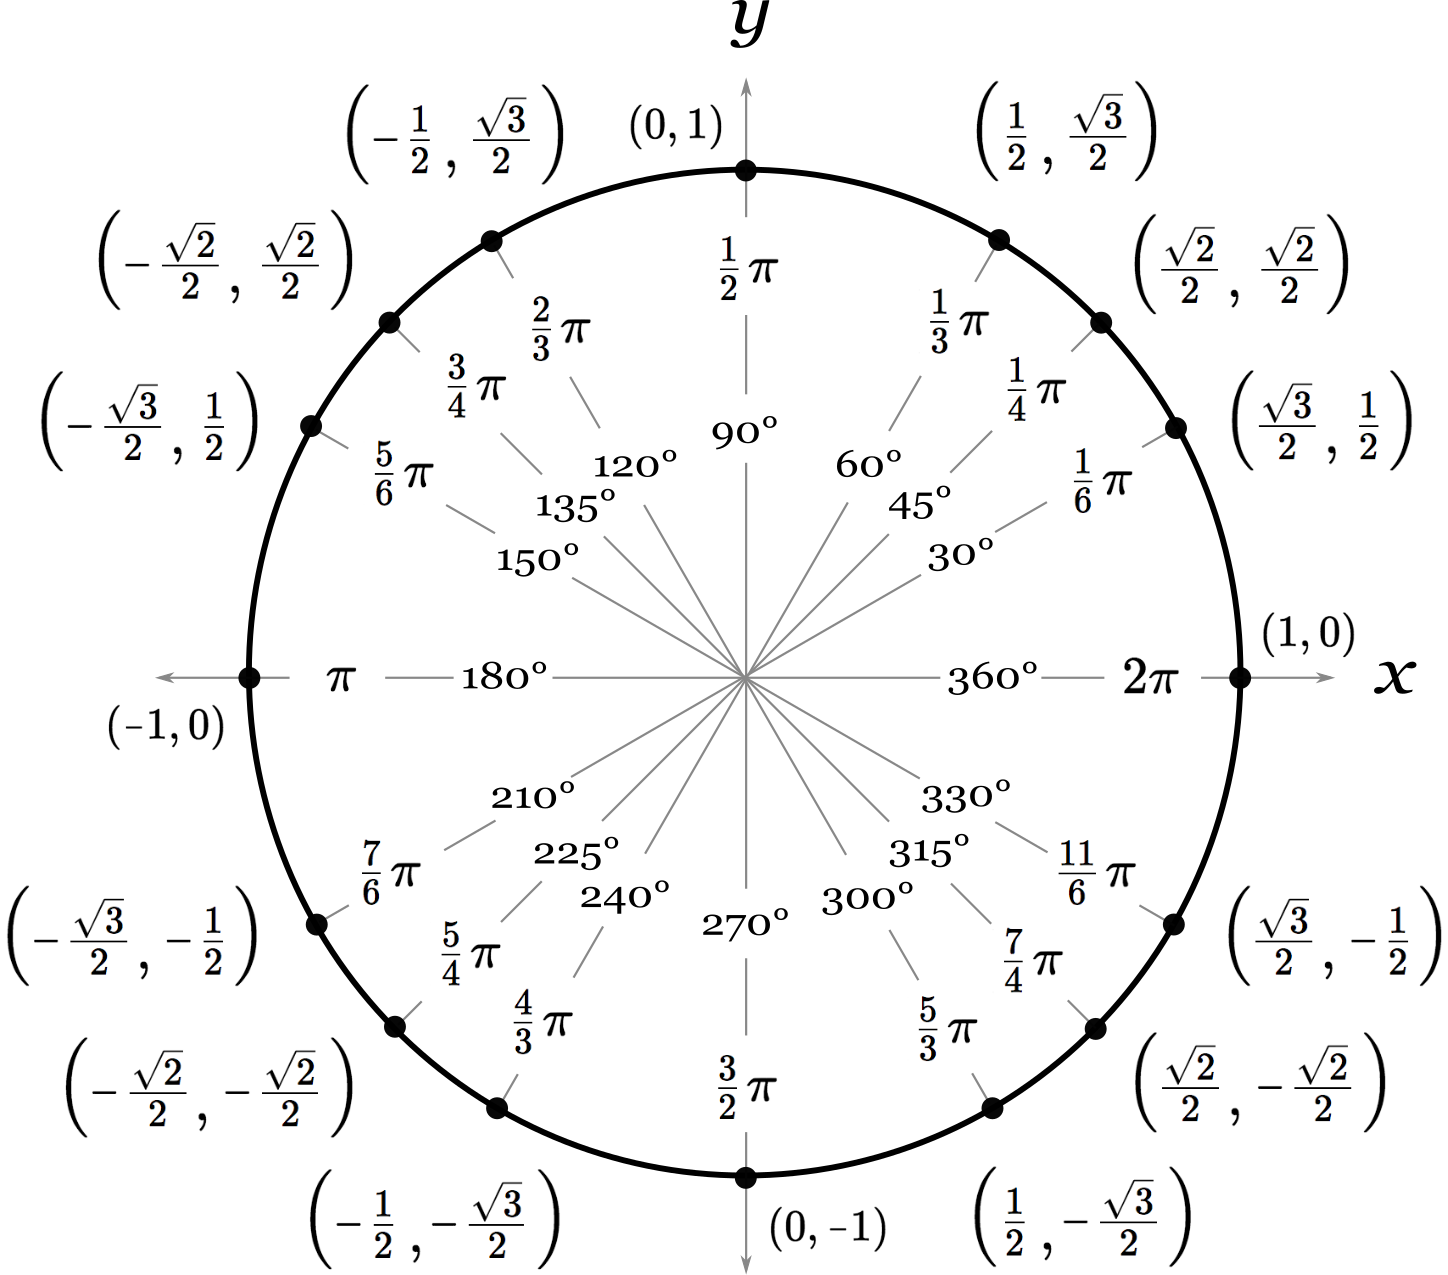 The unit circle chart showing the angles of special right triangles and their intersecting coordinates on the unit circle